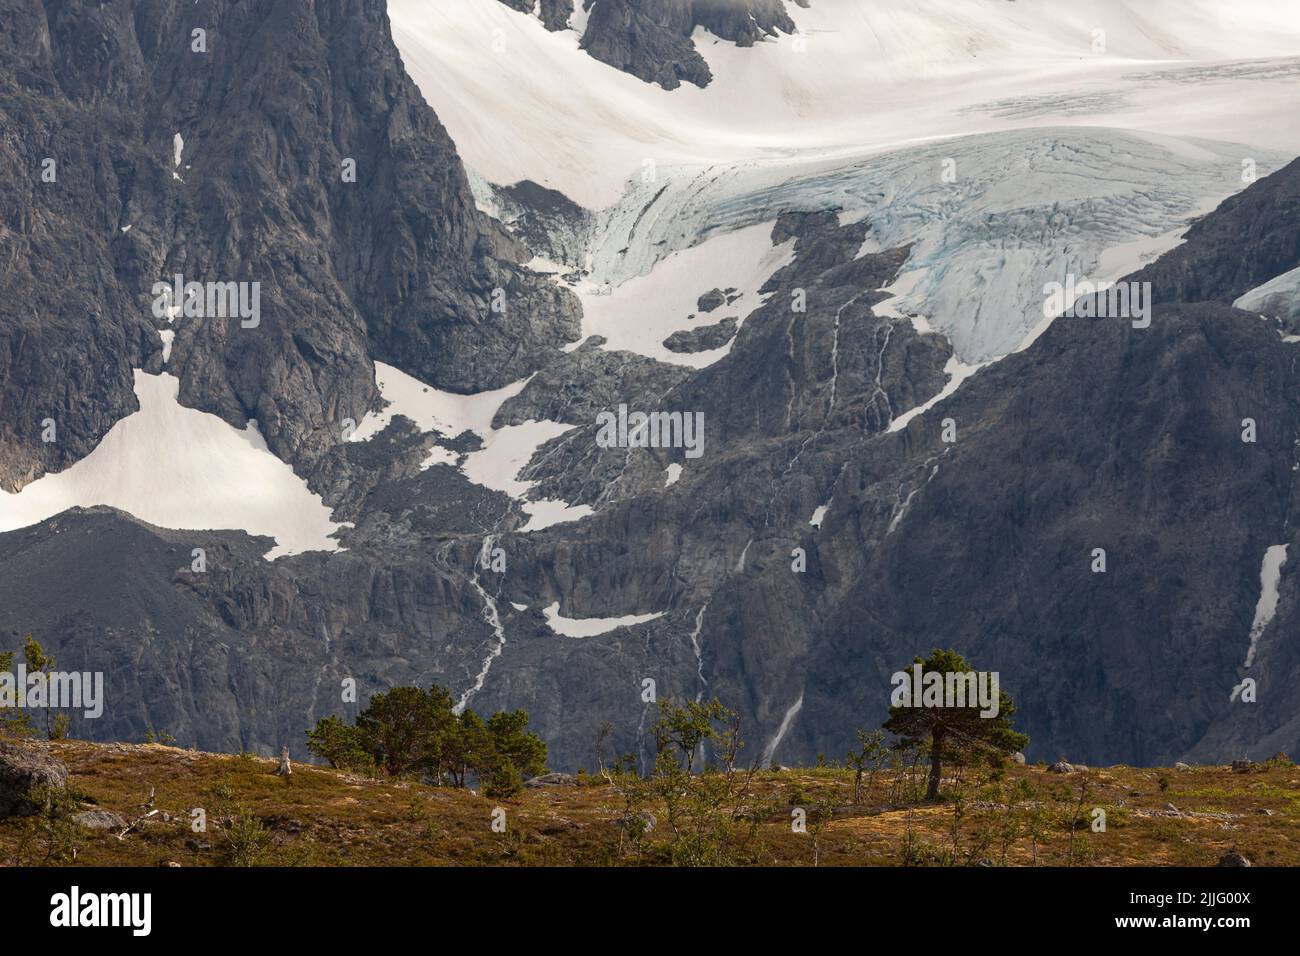 Glacier in Lyngen Alps. Large glacier on the foot of a mountain with a meadow in the foreground and a large tree. Stock Photo